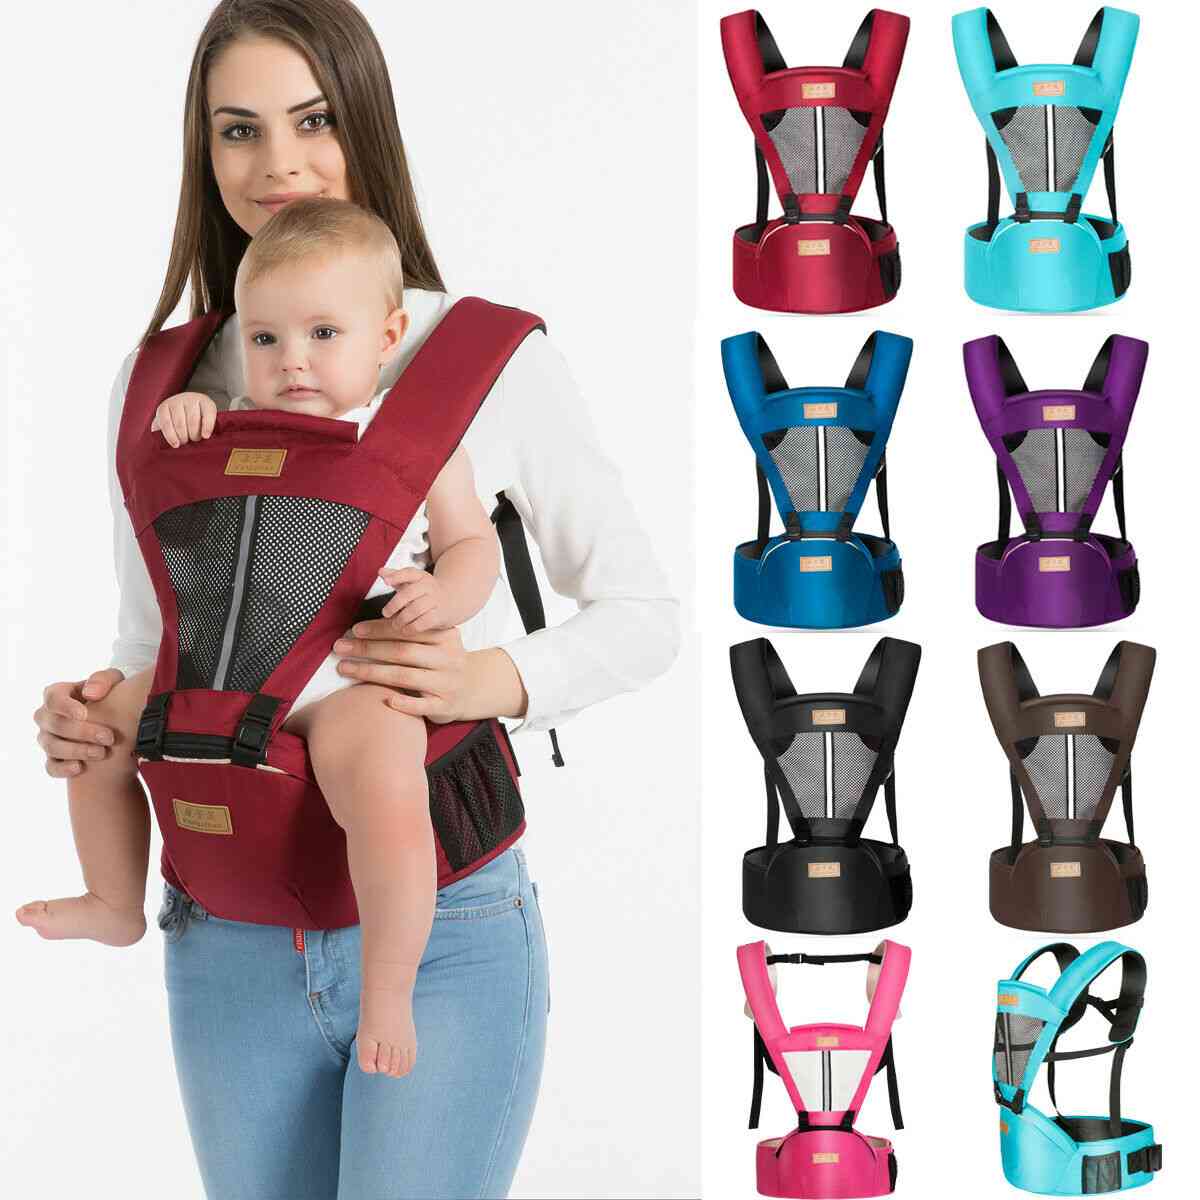 Newborn Baby Carrier Kangaroo, Soft Breathable Adjustable Sling Wrap Portable Hipseat